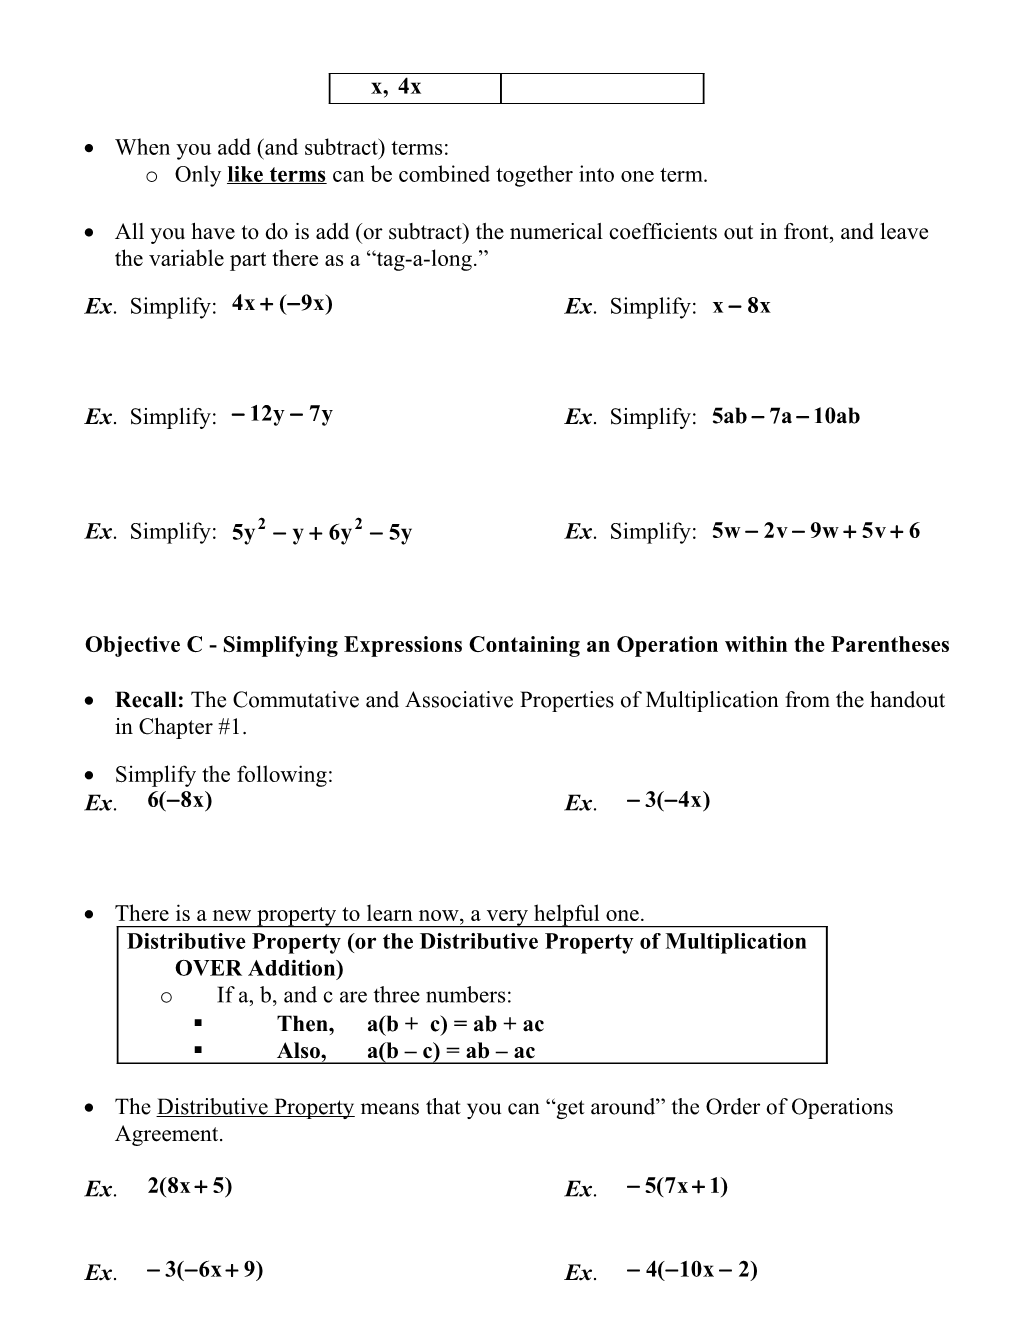 Objective a - Evaluating Variable Expressions